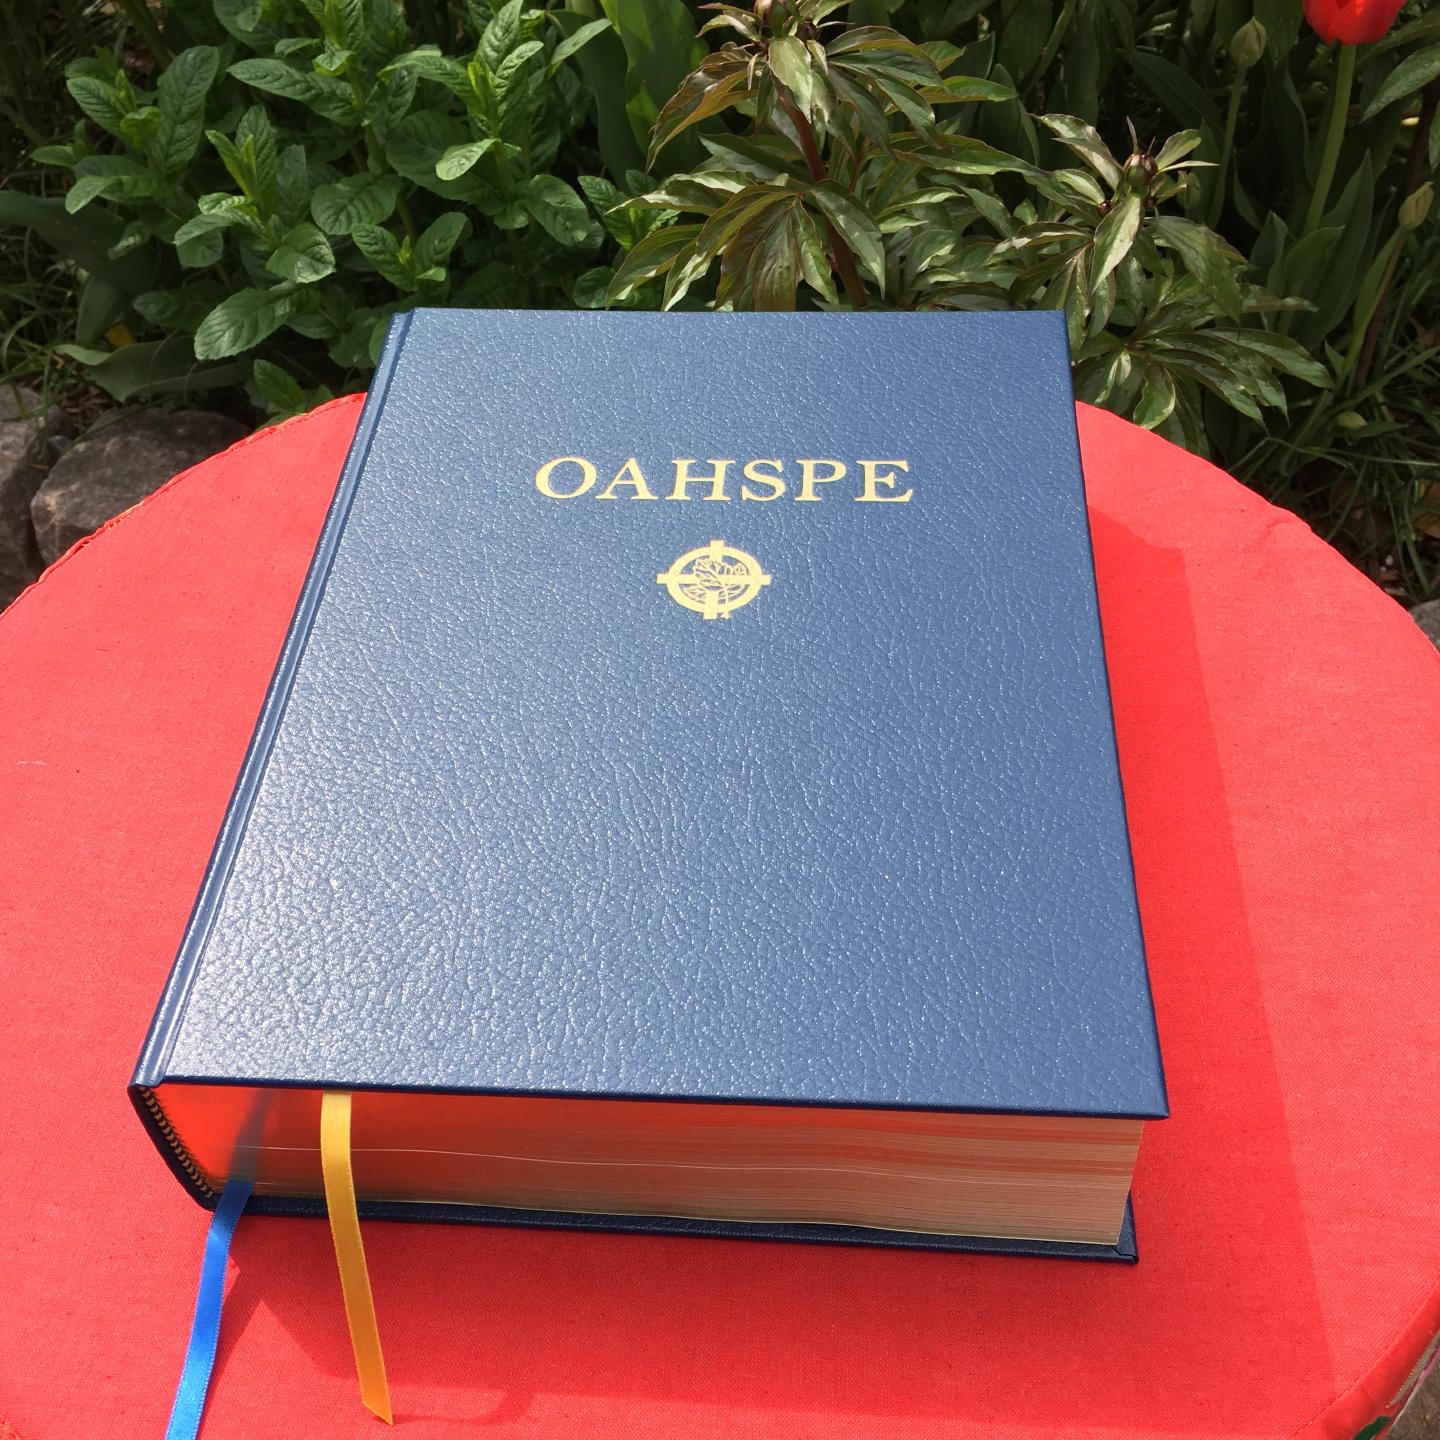 A copy of Oahspe sitting on a table in a garden.